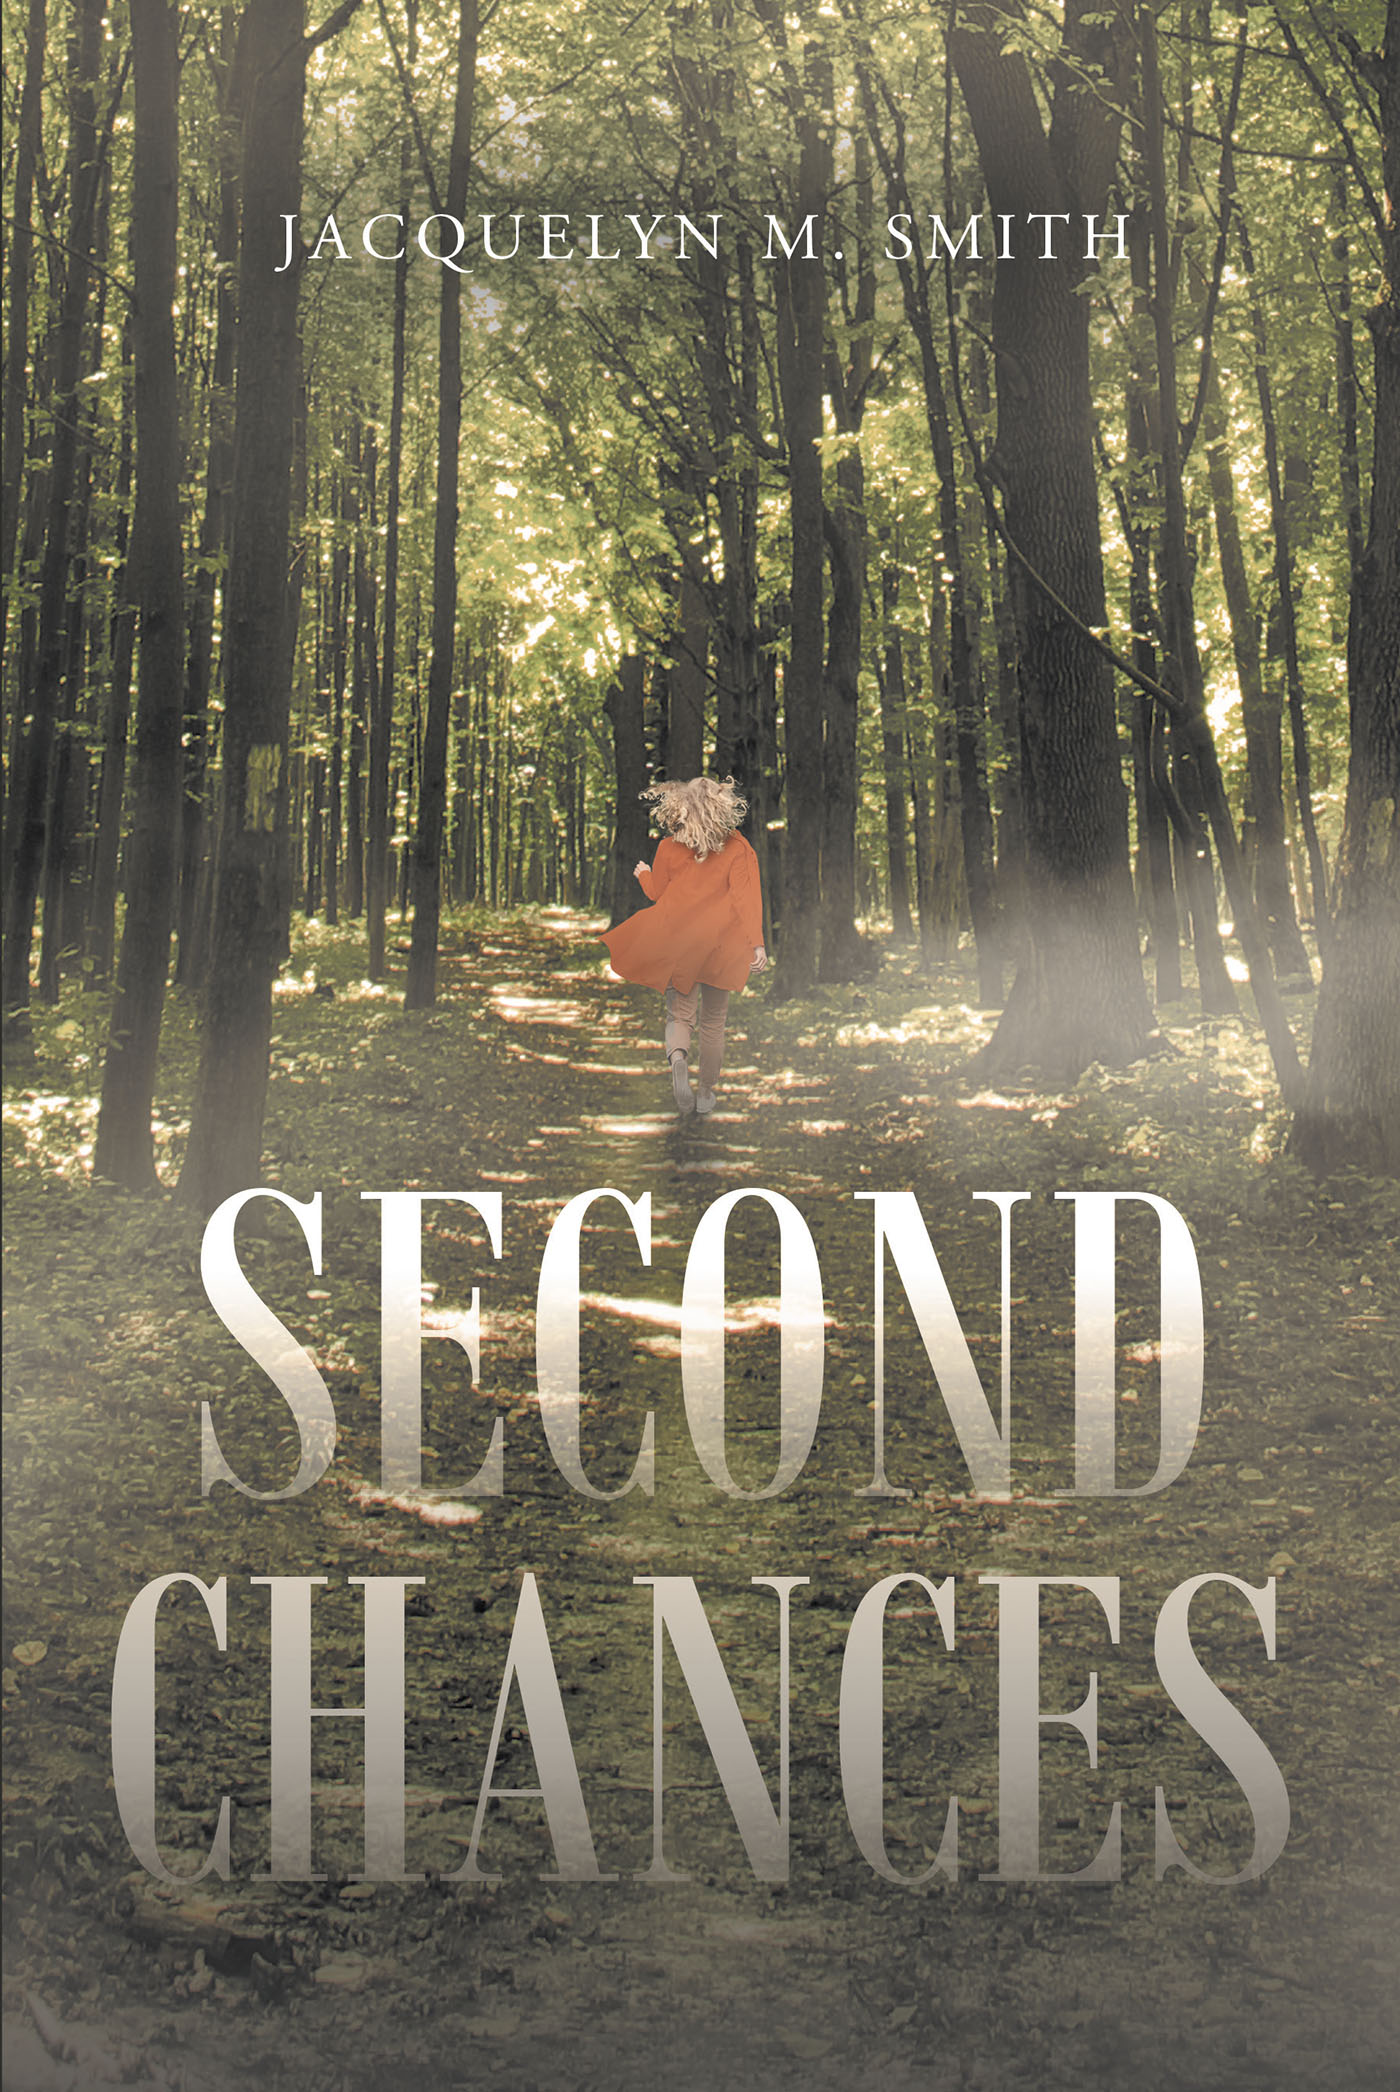 Author Jacquelyn M. Smith’s New Book, "Second Chances," is a Thrilling Story of One Innocent Woman Who Finds Herself on the Run from a Terrorist Cell